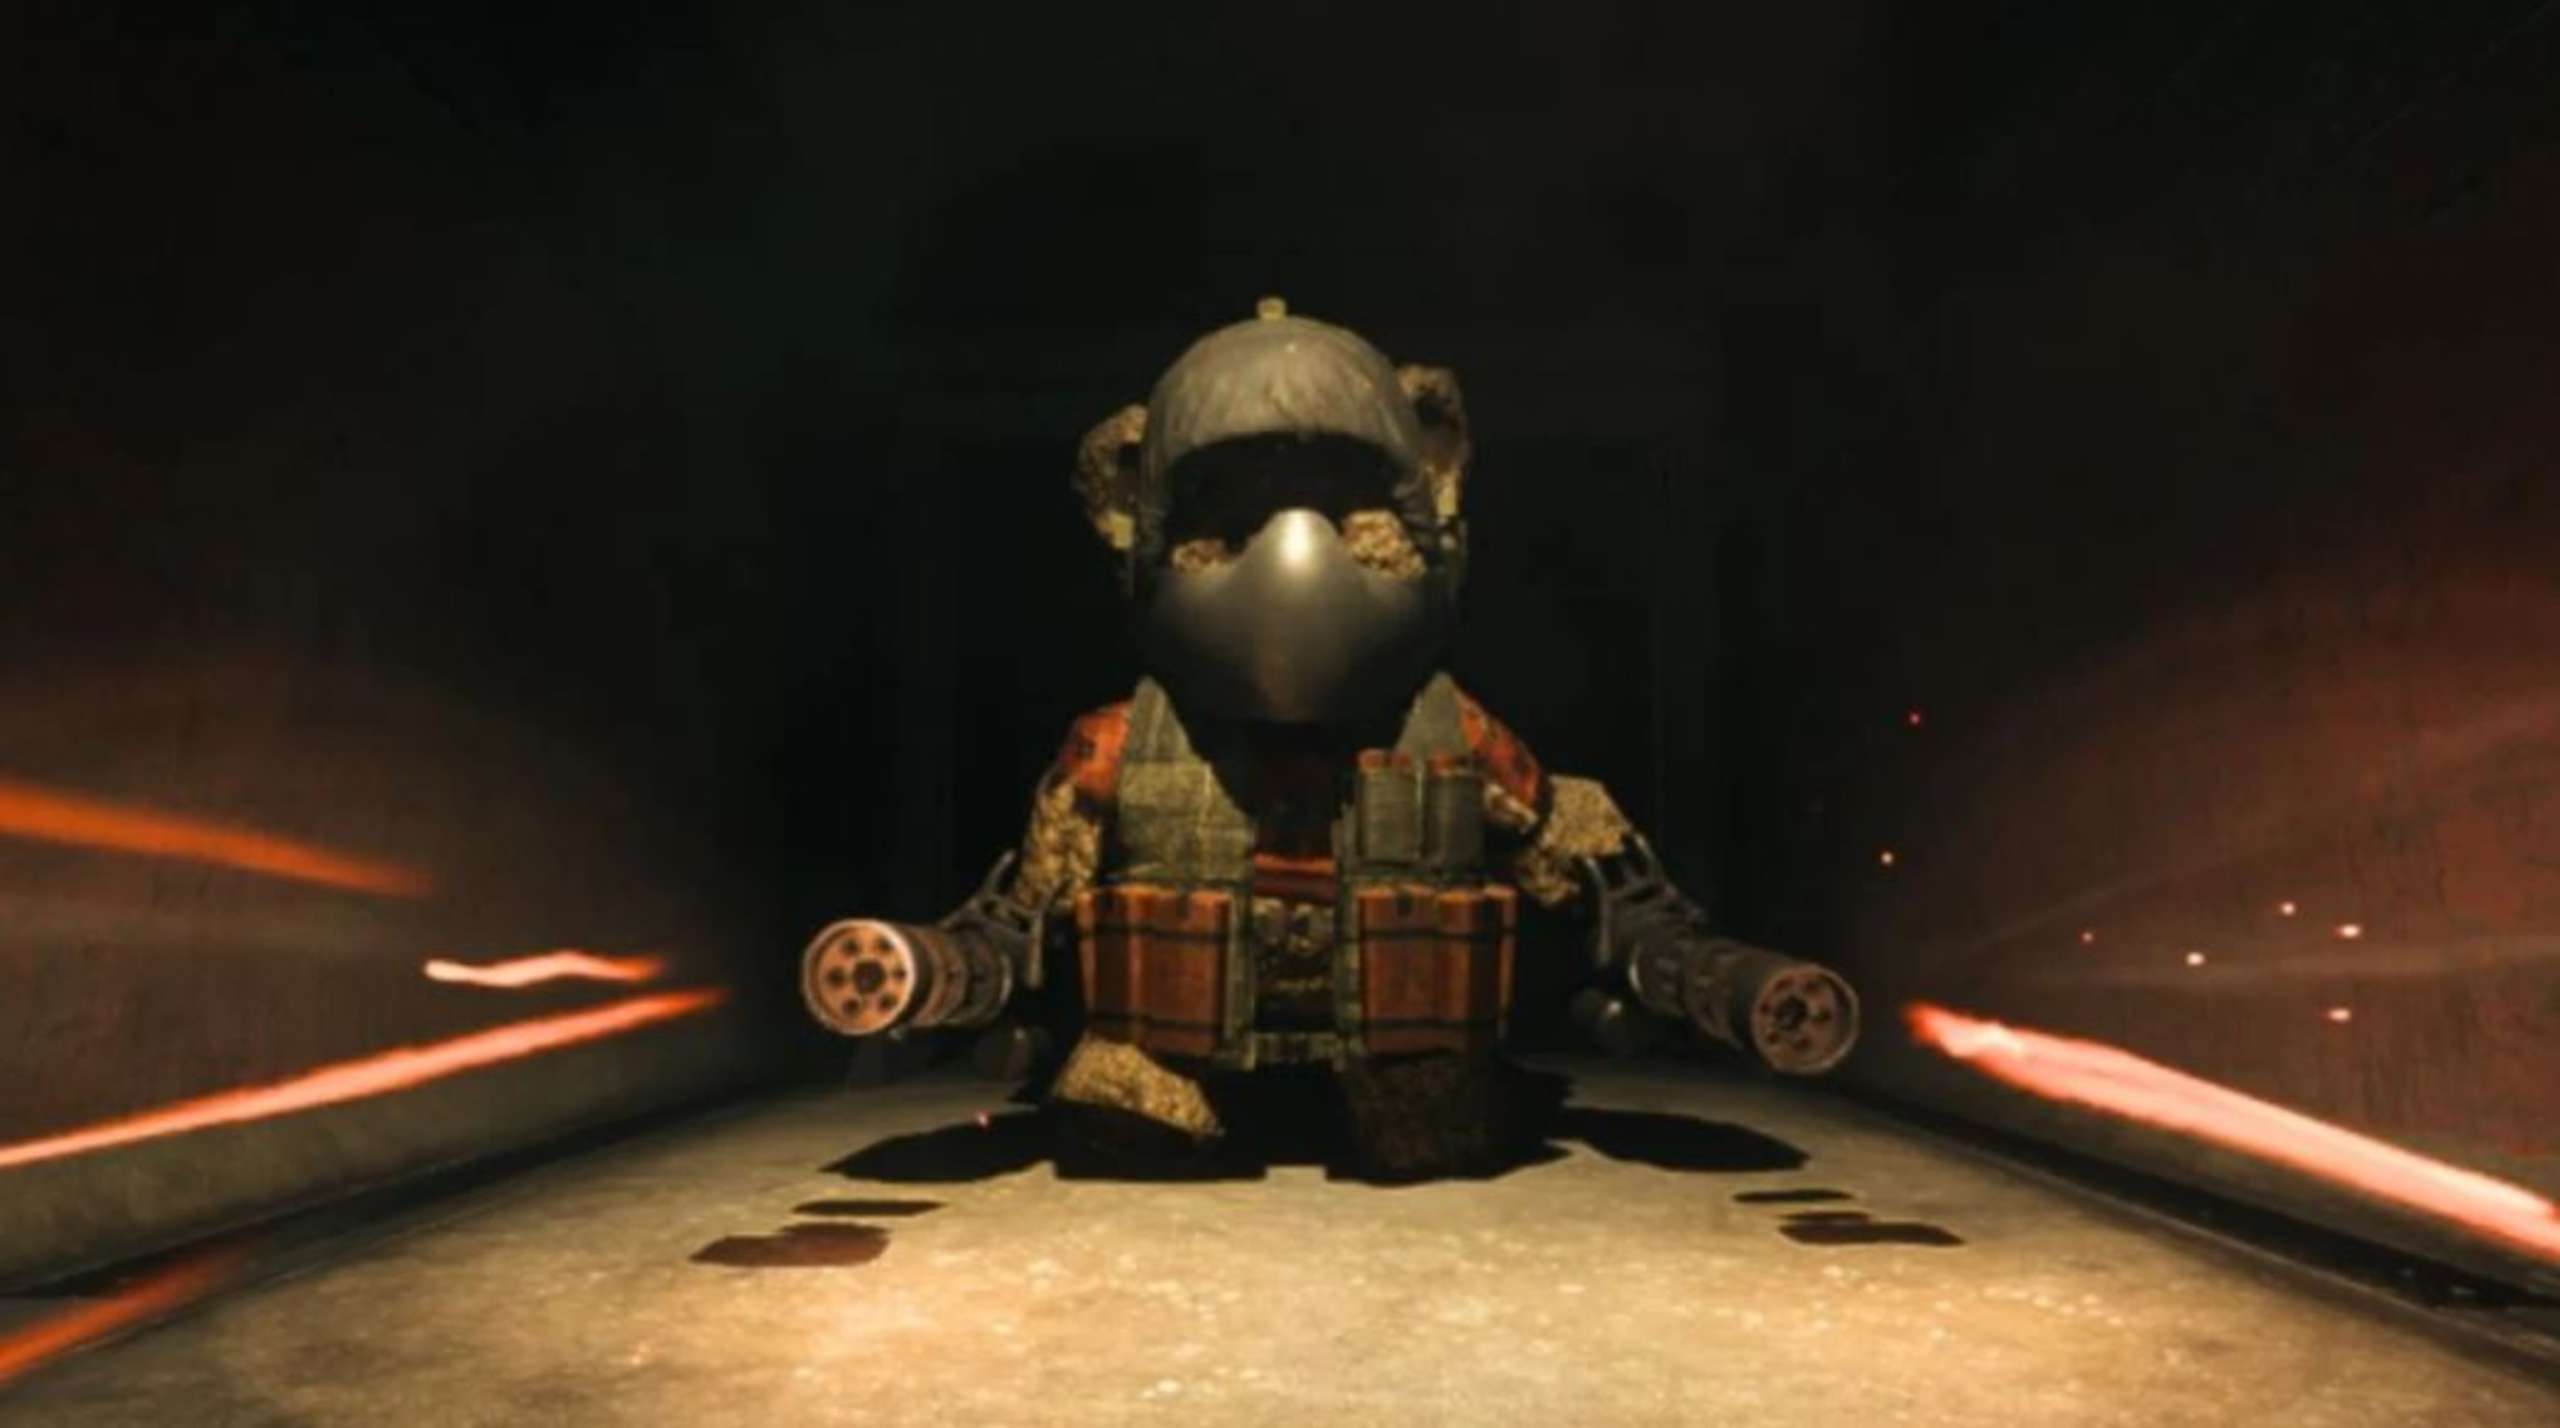 Modern Warfare 2 Features A Secret Teddy Bear Location, Just Like The Previous Call Of Duty Games